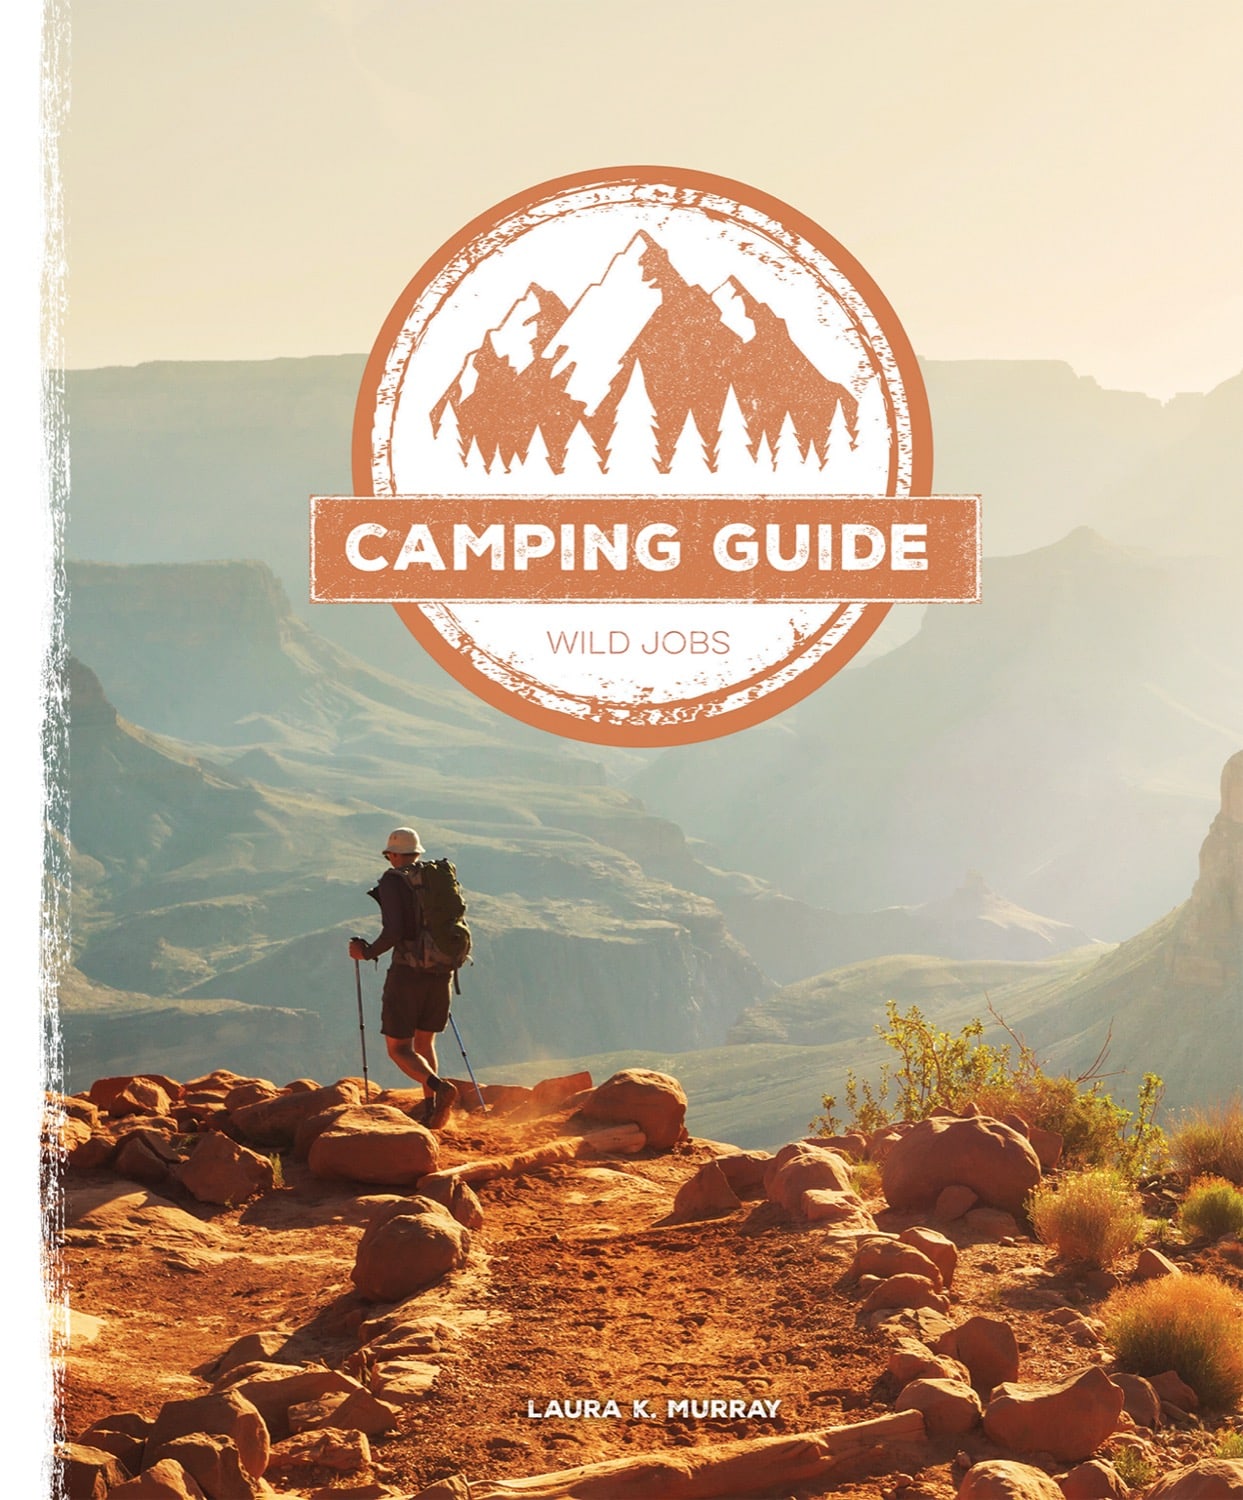 Wild Jobs: Camping Guide